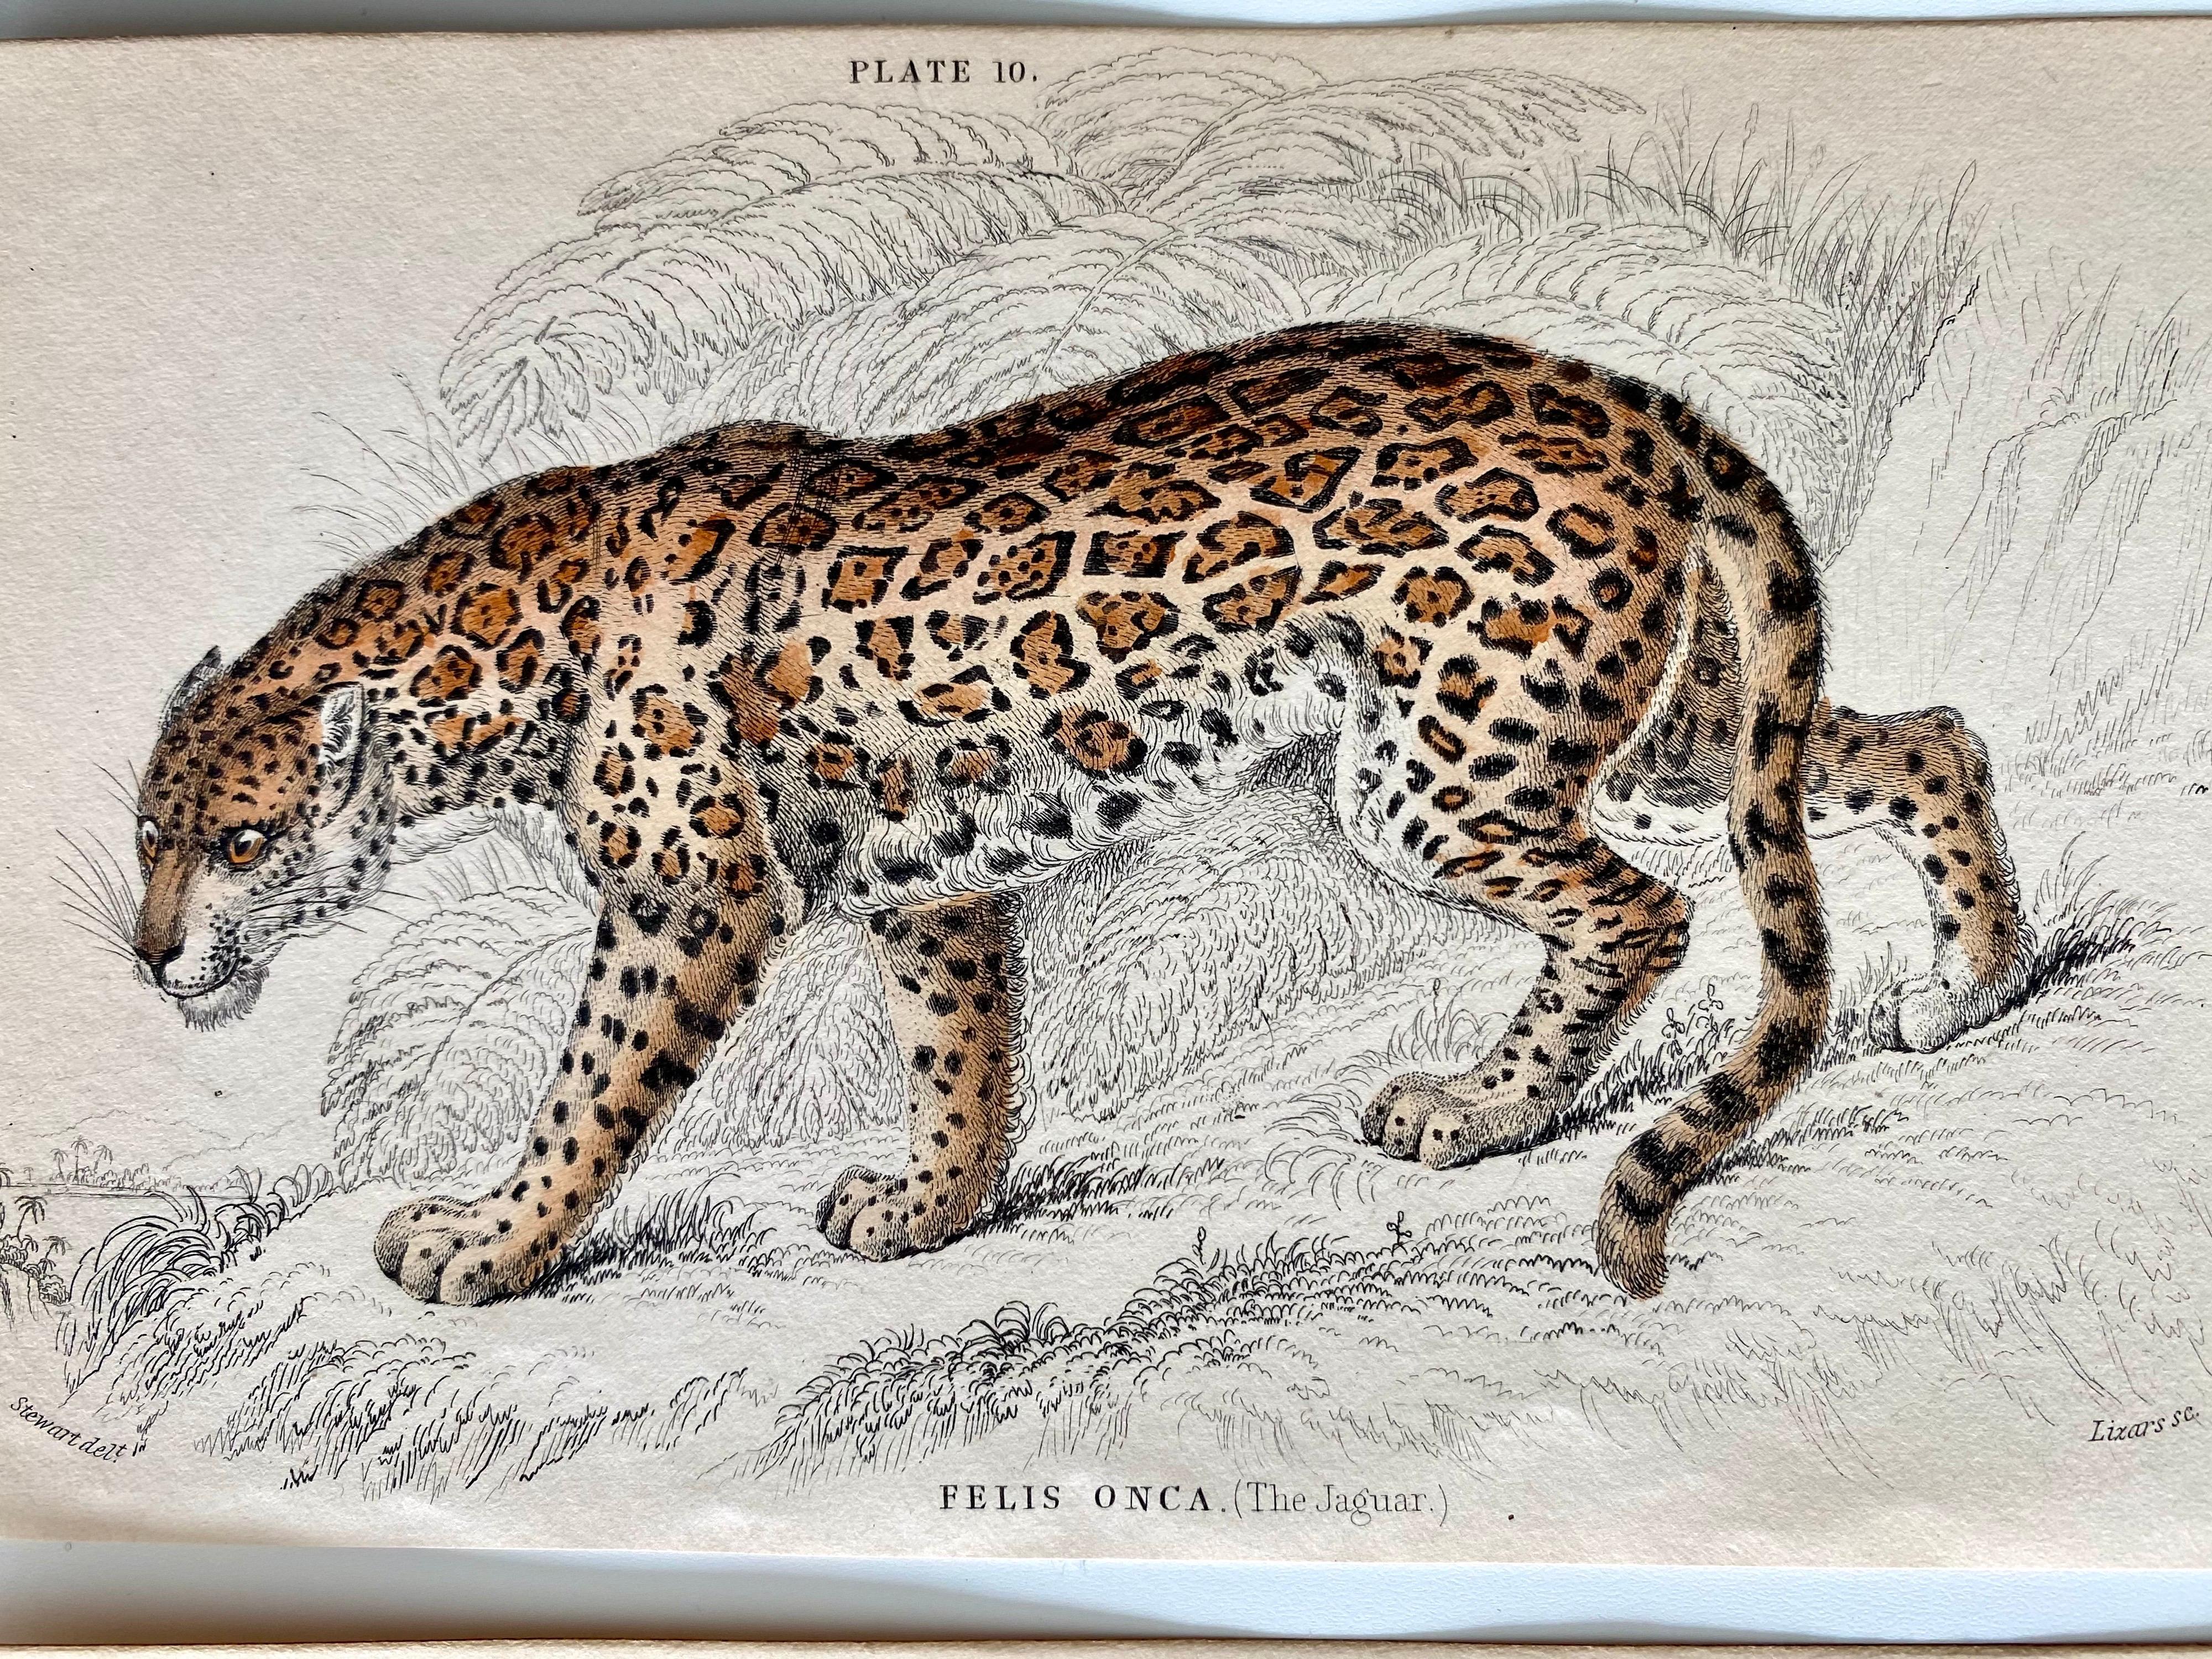 Antique Prints of Rare Felines - Big Cats - Exotic Tropical Lion Tiger Puma - Gray Animal Print by Sir William Jardine, 7th Baronet (after)